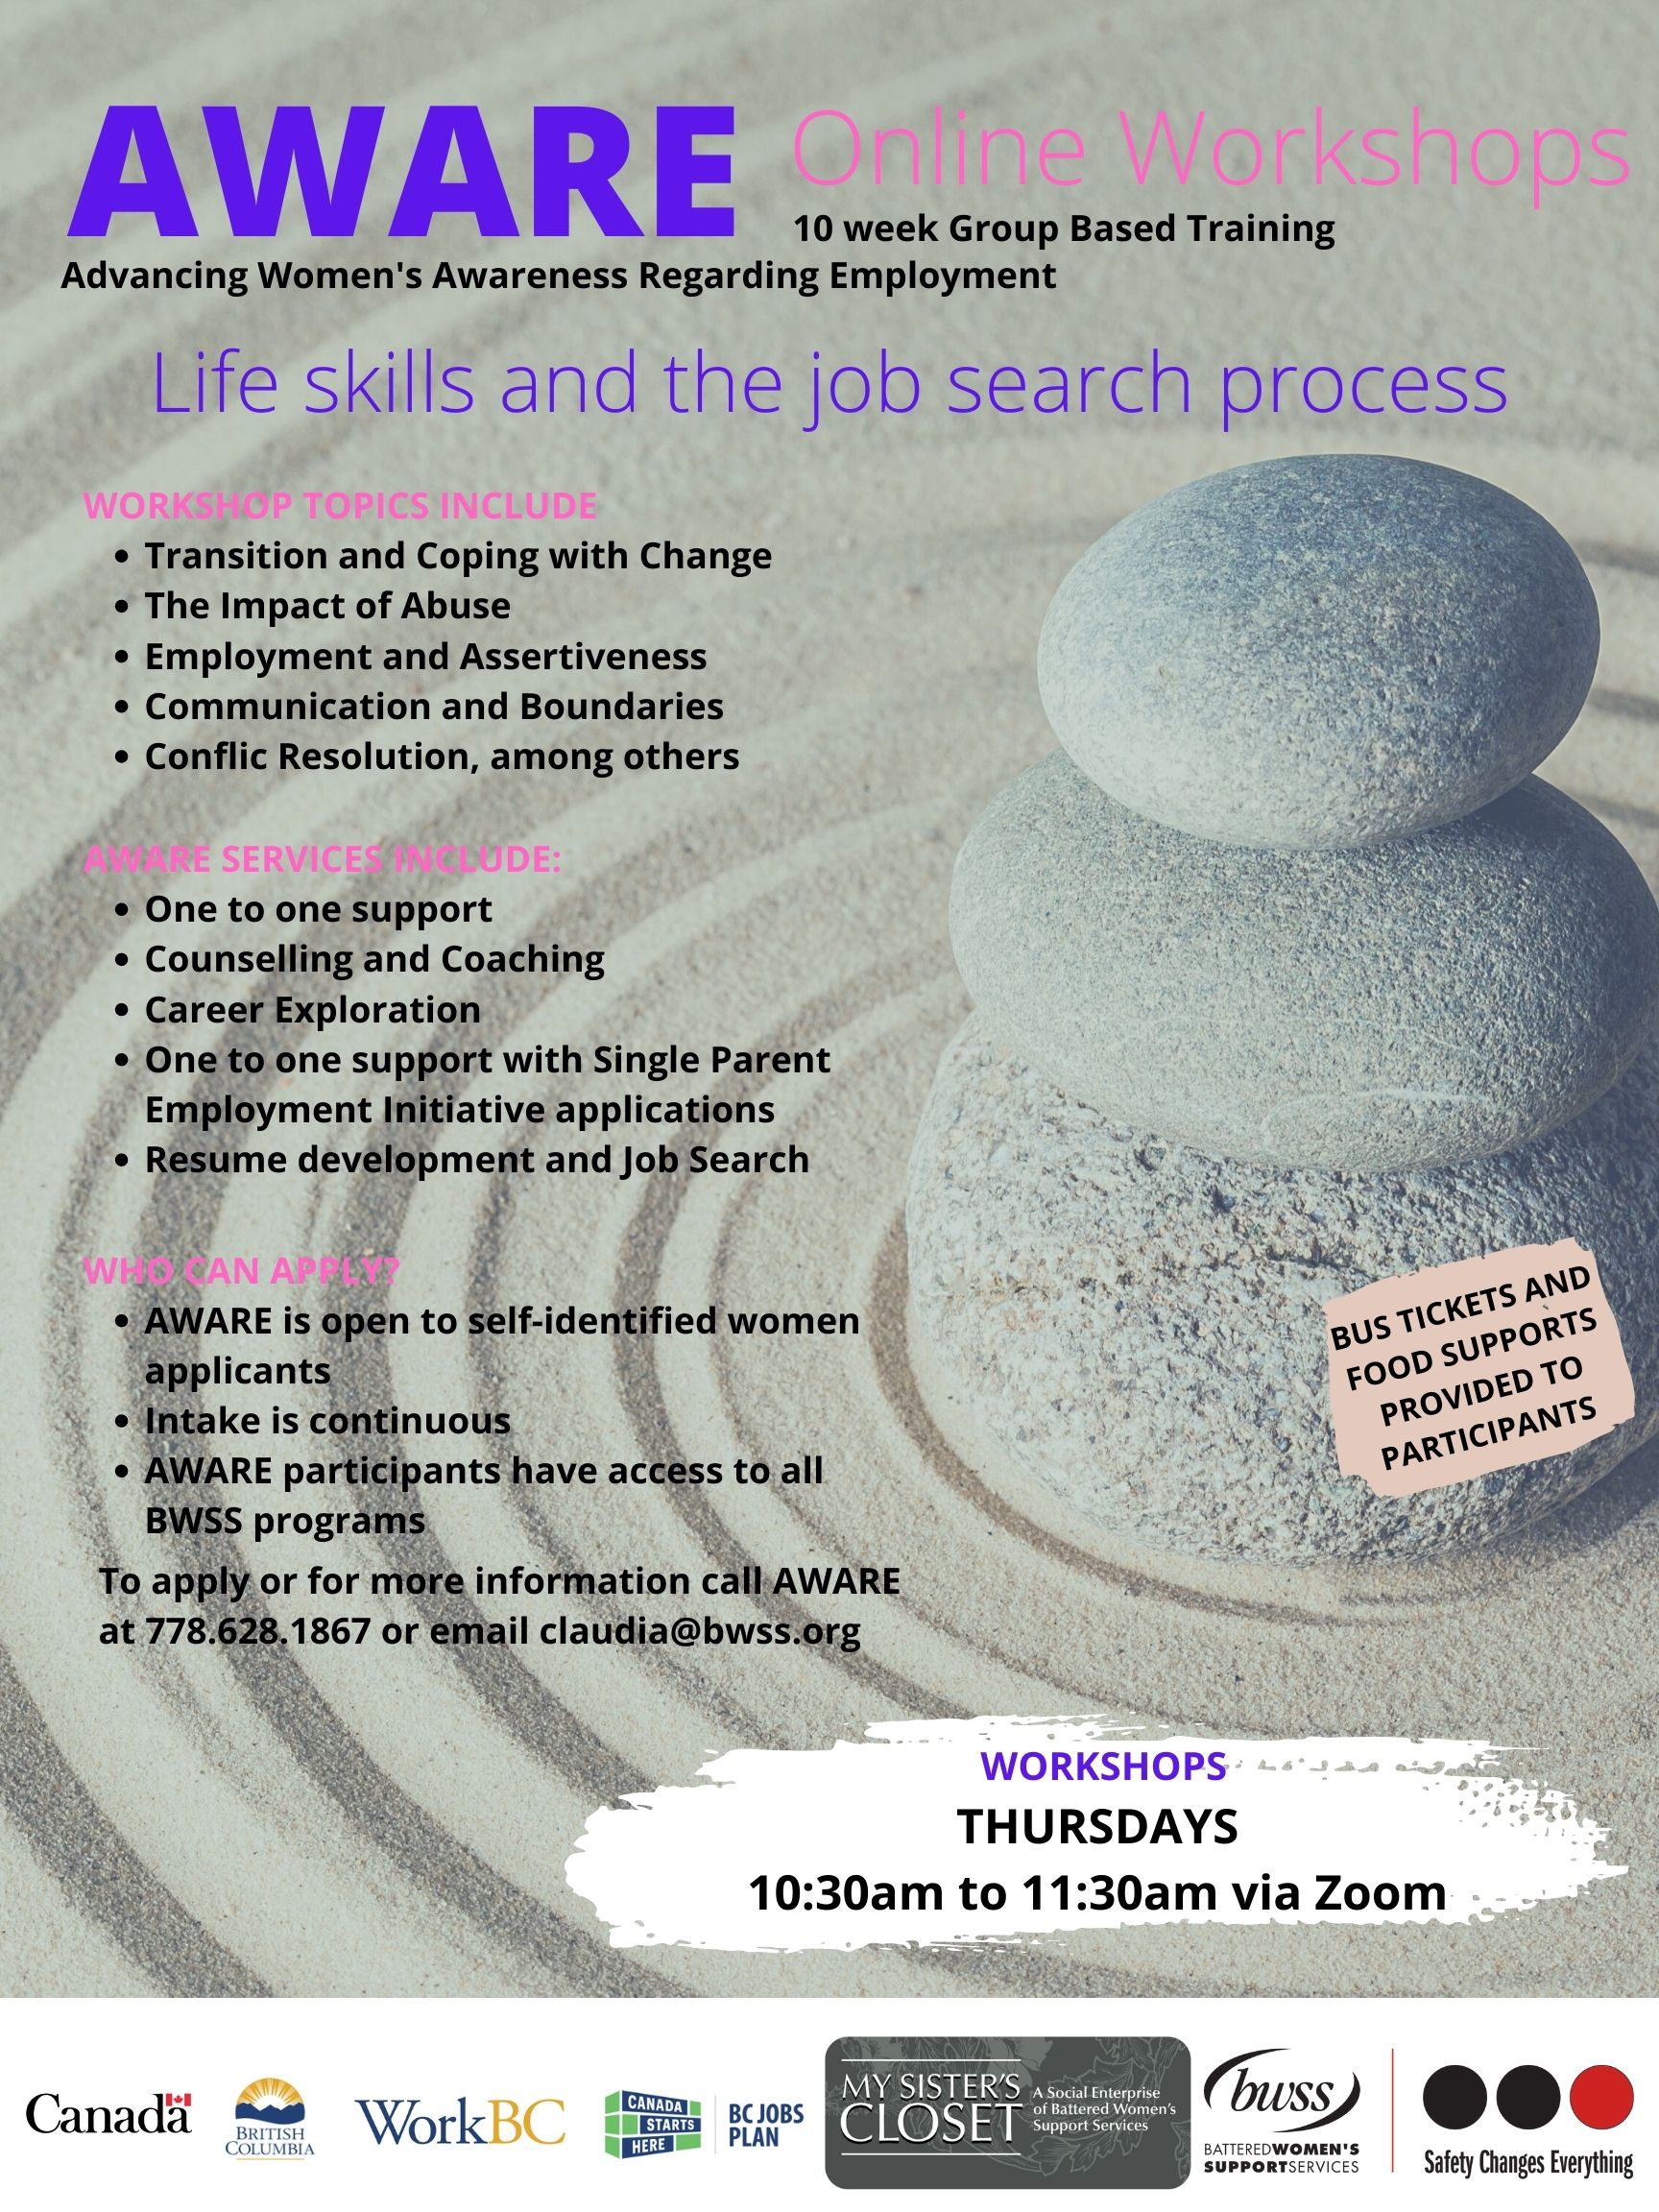 Life skills and the job search process workshop series